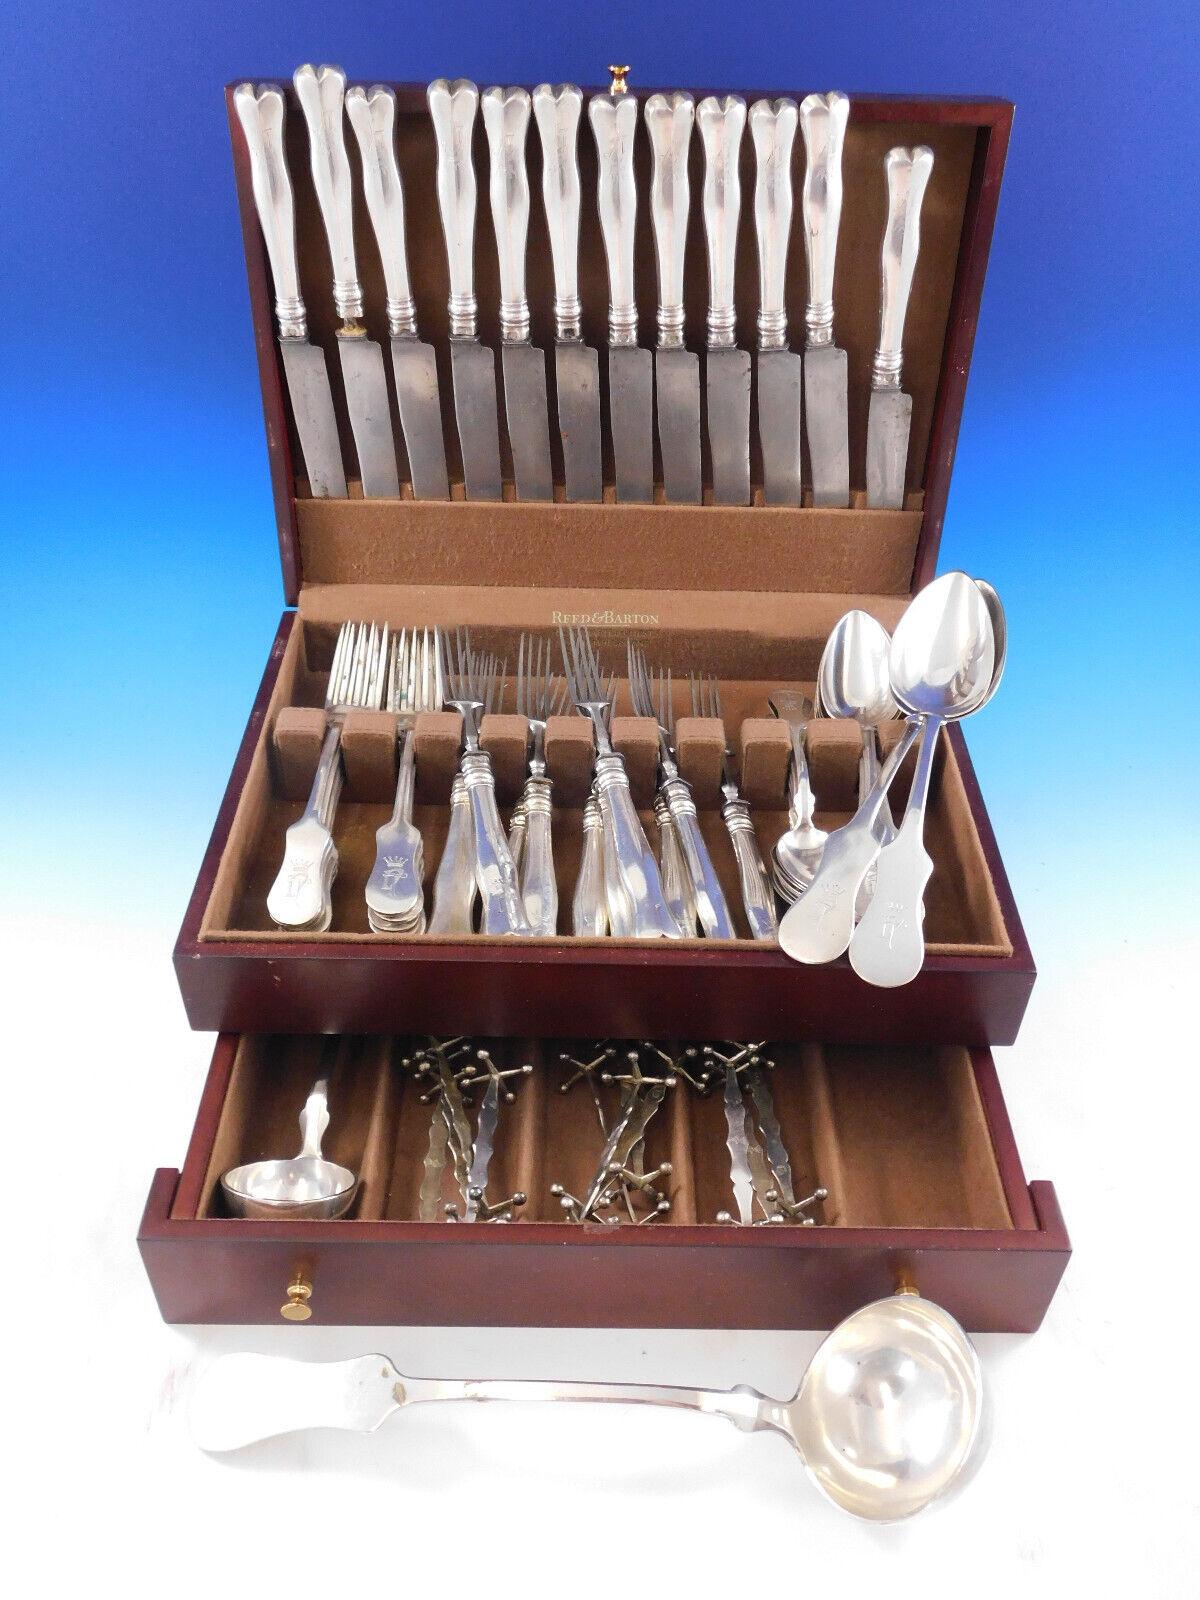 Fiddle by Thomas Dub, Vienna Austria 1812 silver flatware set with hallmark for the year 1863 - 66 pieces. This set includes:
12 Large dinner knives w/steel blades, 10 3/4